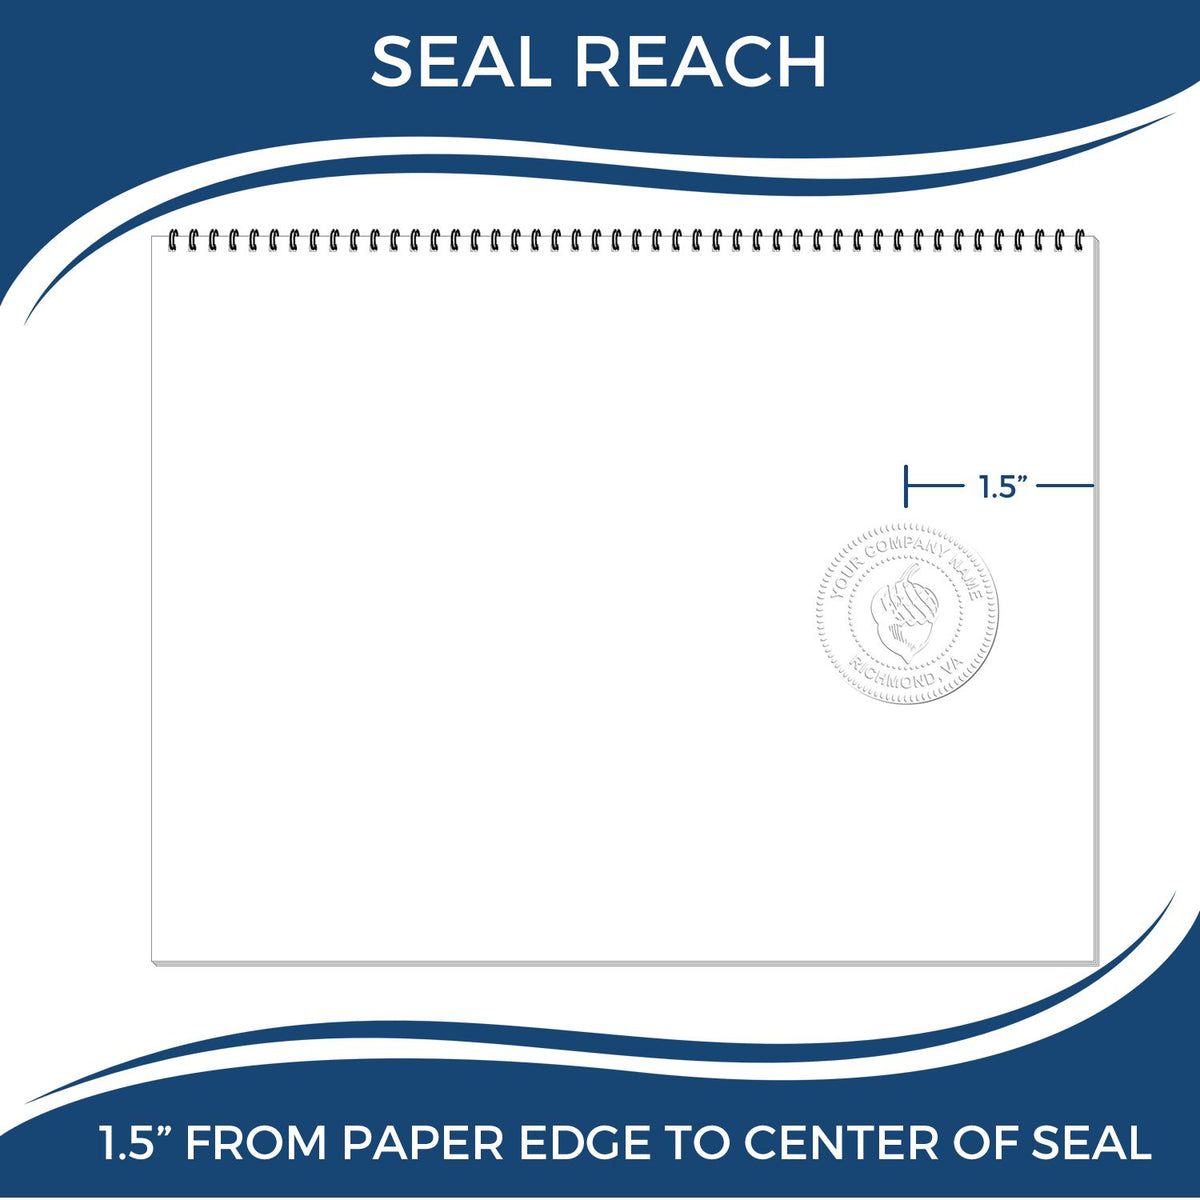 An infographic showing the seal reach which is represented by a ruler and a miniature seal image of the Gift Colorado Architect Seal